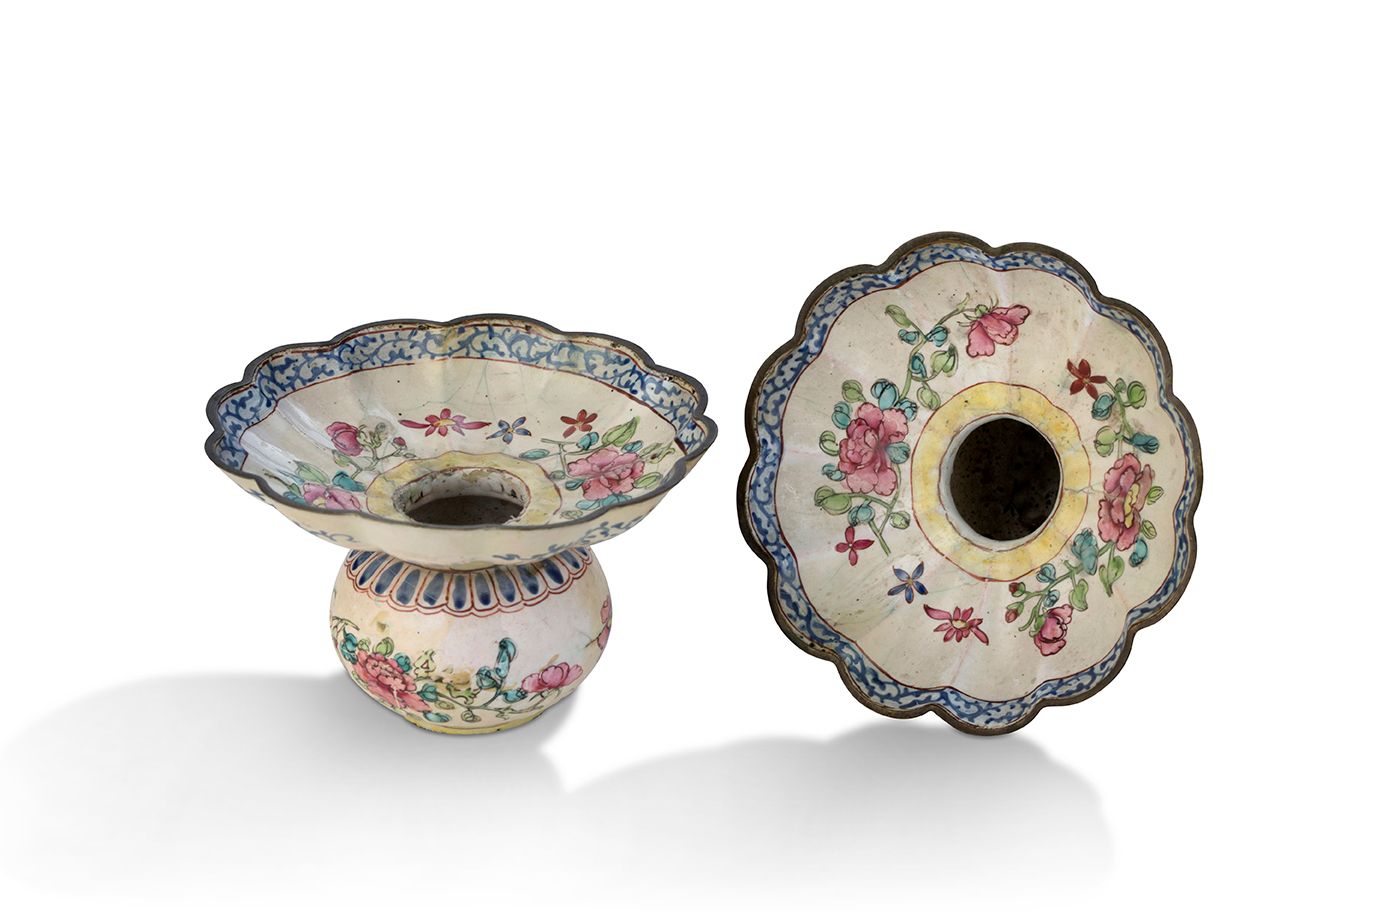 CHINE, CANTON DYNASTIE QING, PÉRIODE QIANLONG (1736-1795) Pair of spittoons
In p&hellip;